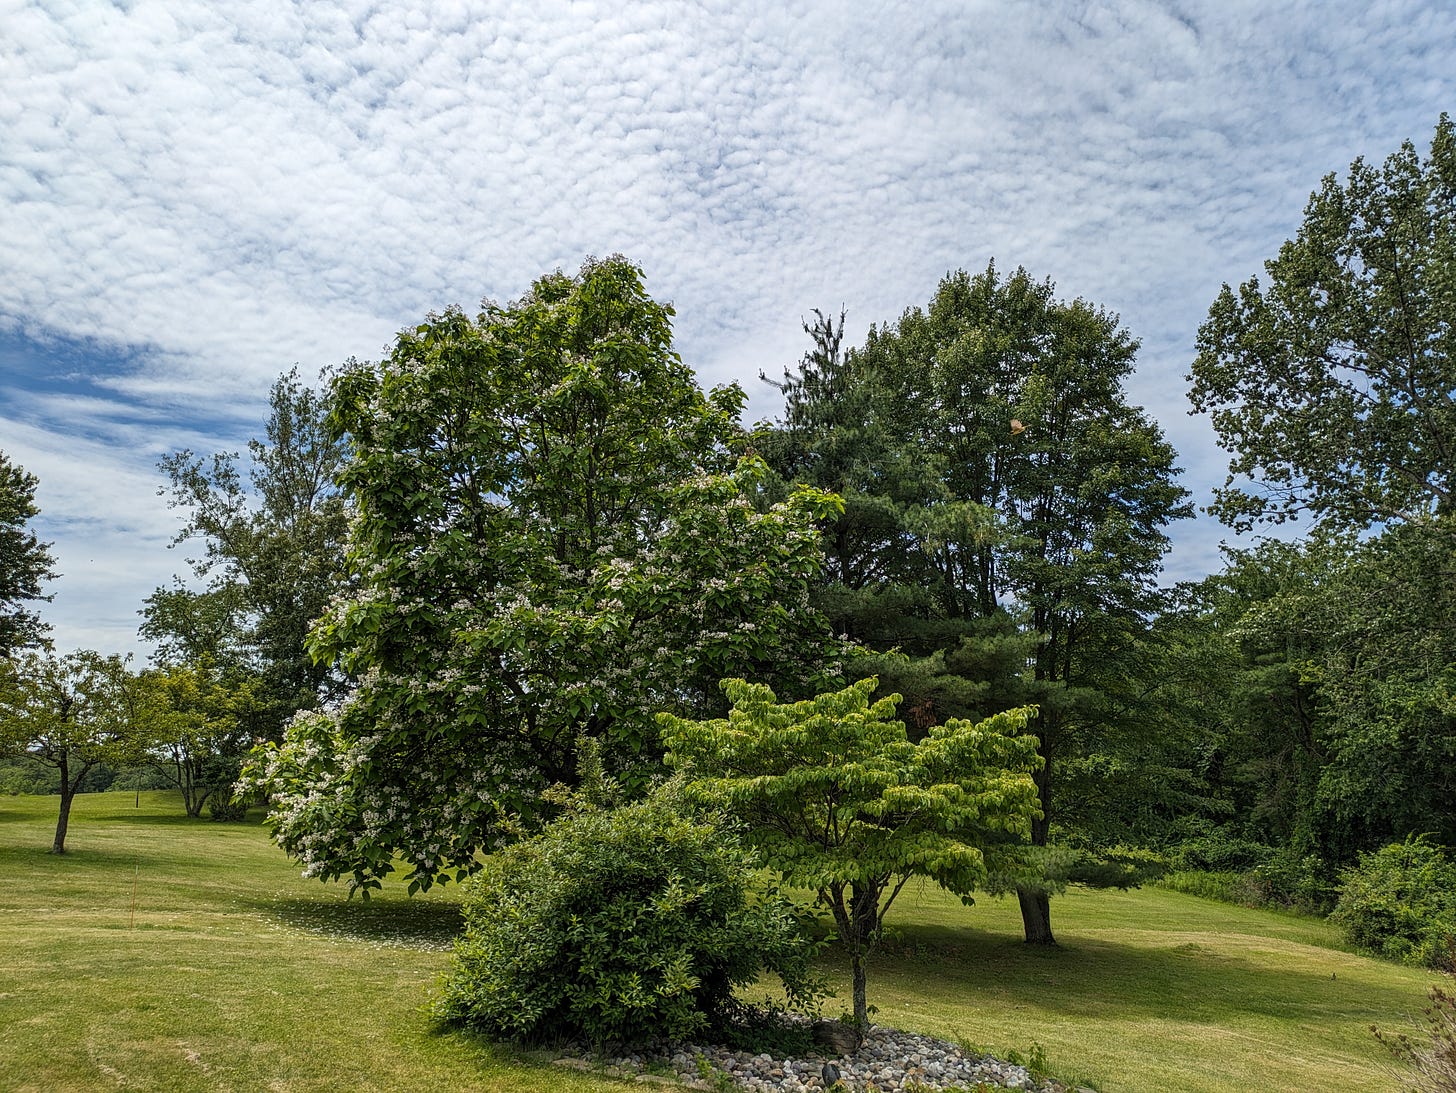 A photo of my backyard on a partly cloudy, sunny day. There are lots of full green trees and grass. No other houses are in sight.